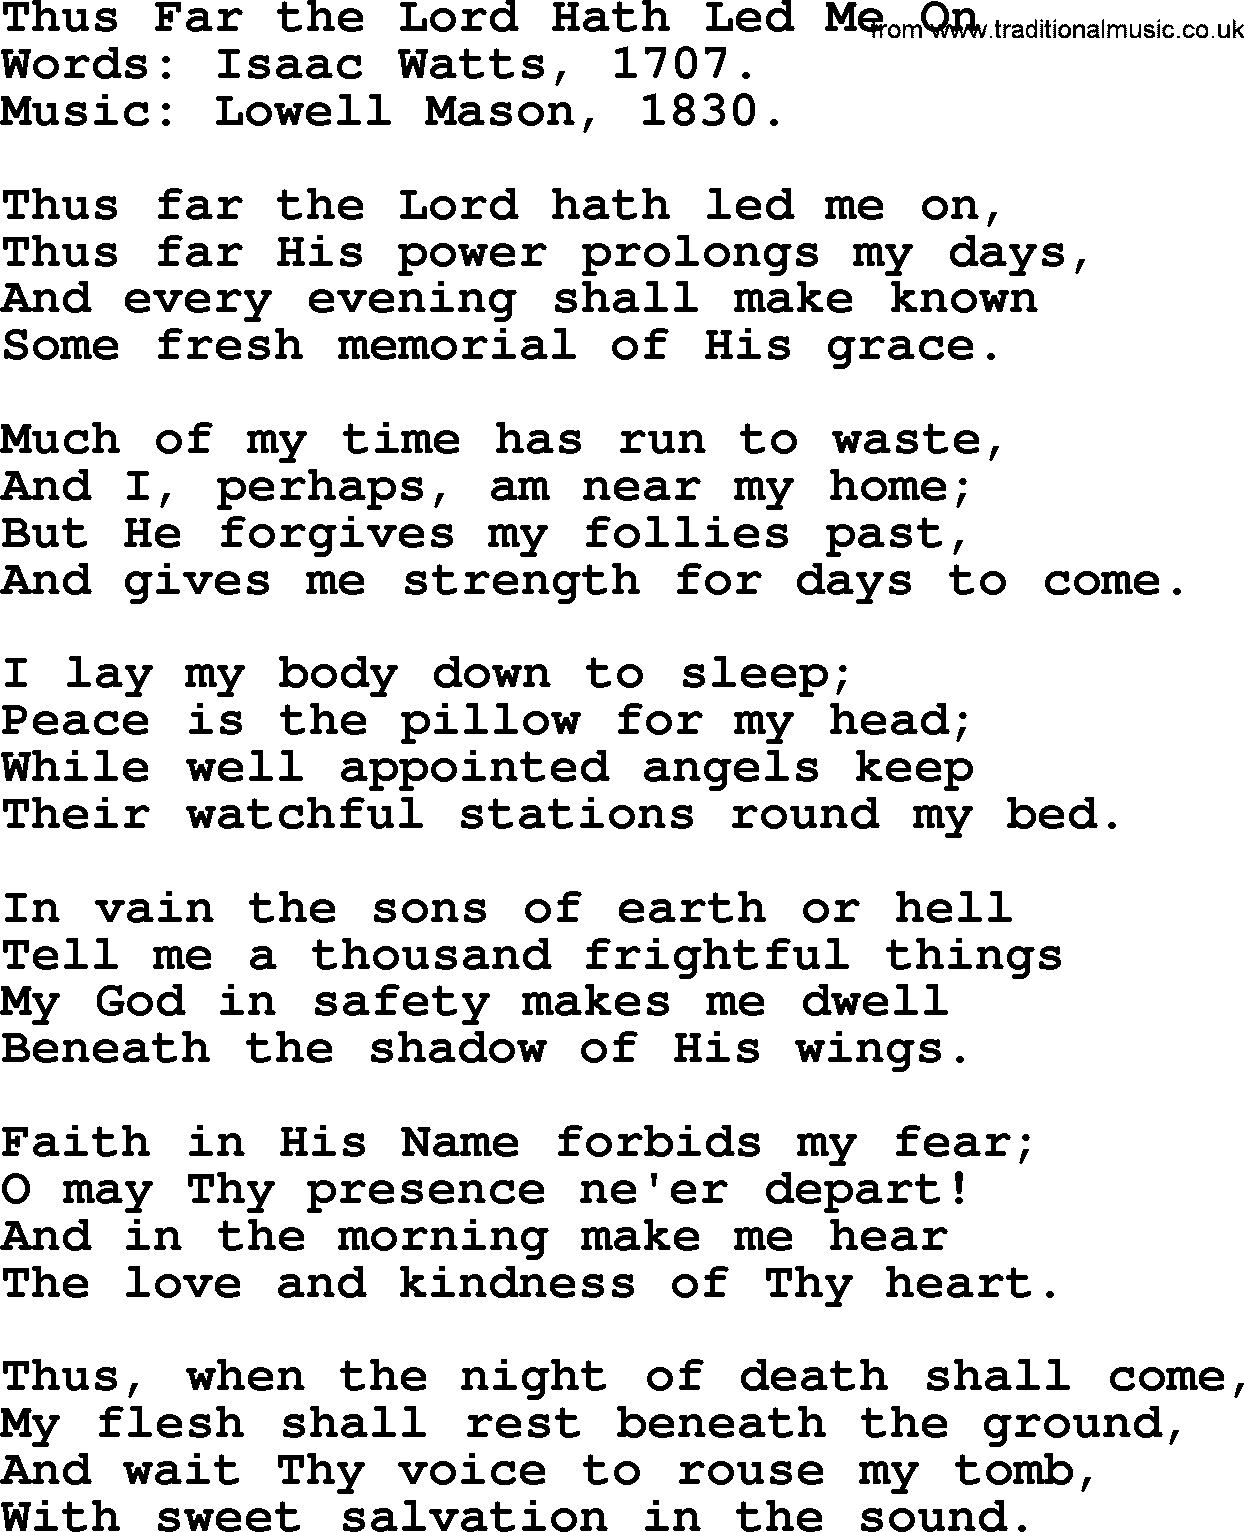 100+ Christian Funeral Hymns collection, Hymn: Thus Far the Lord Hath Led Me On, lyrics and PDF